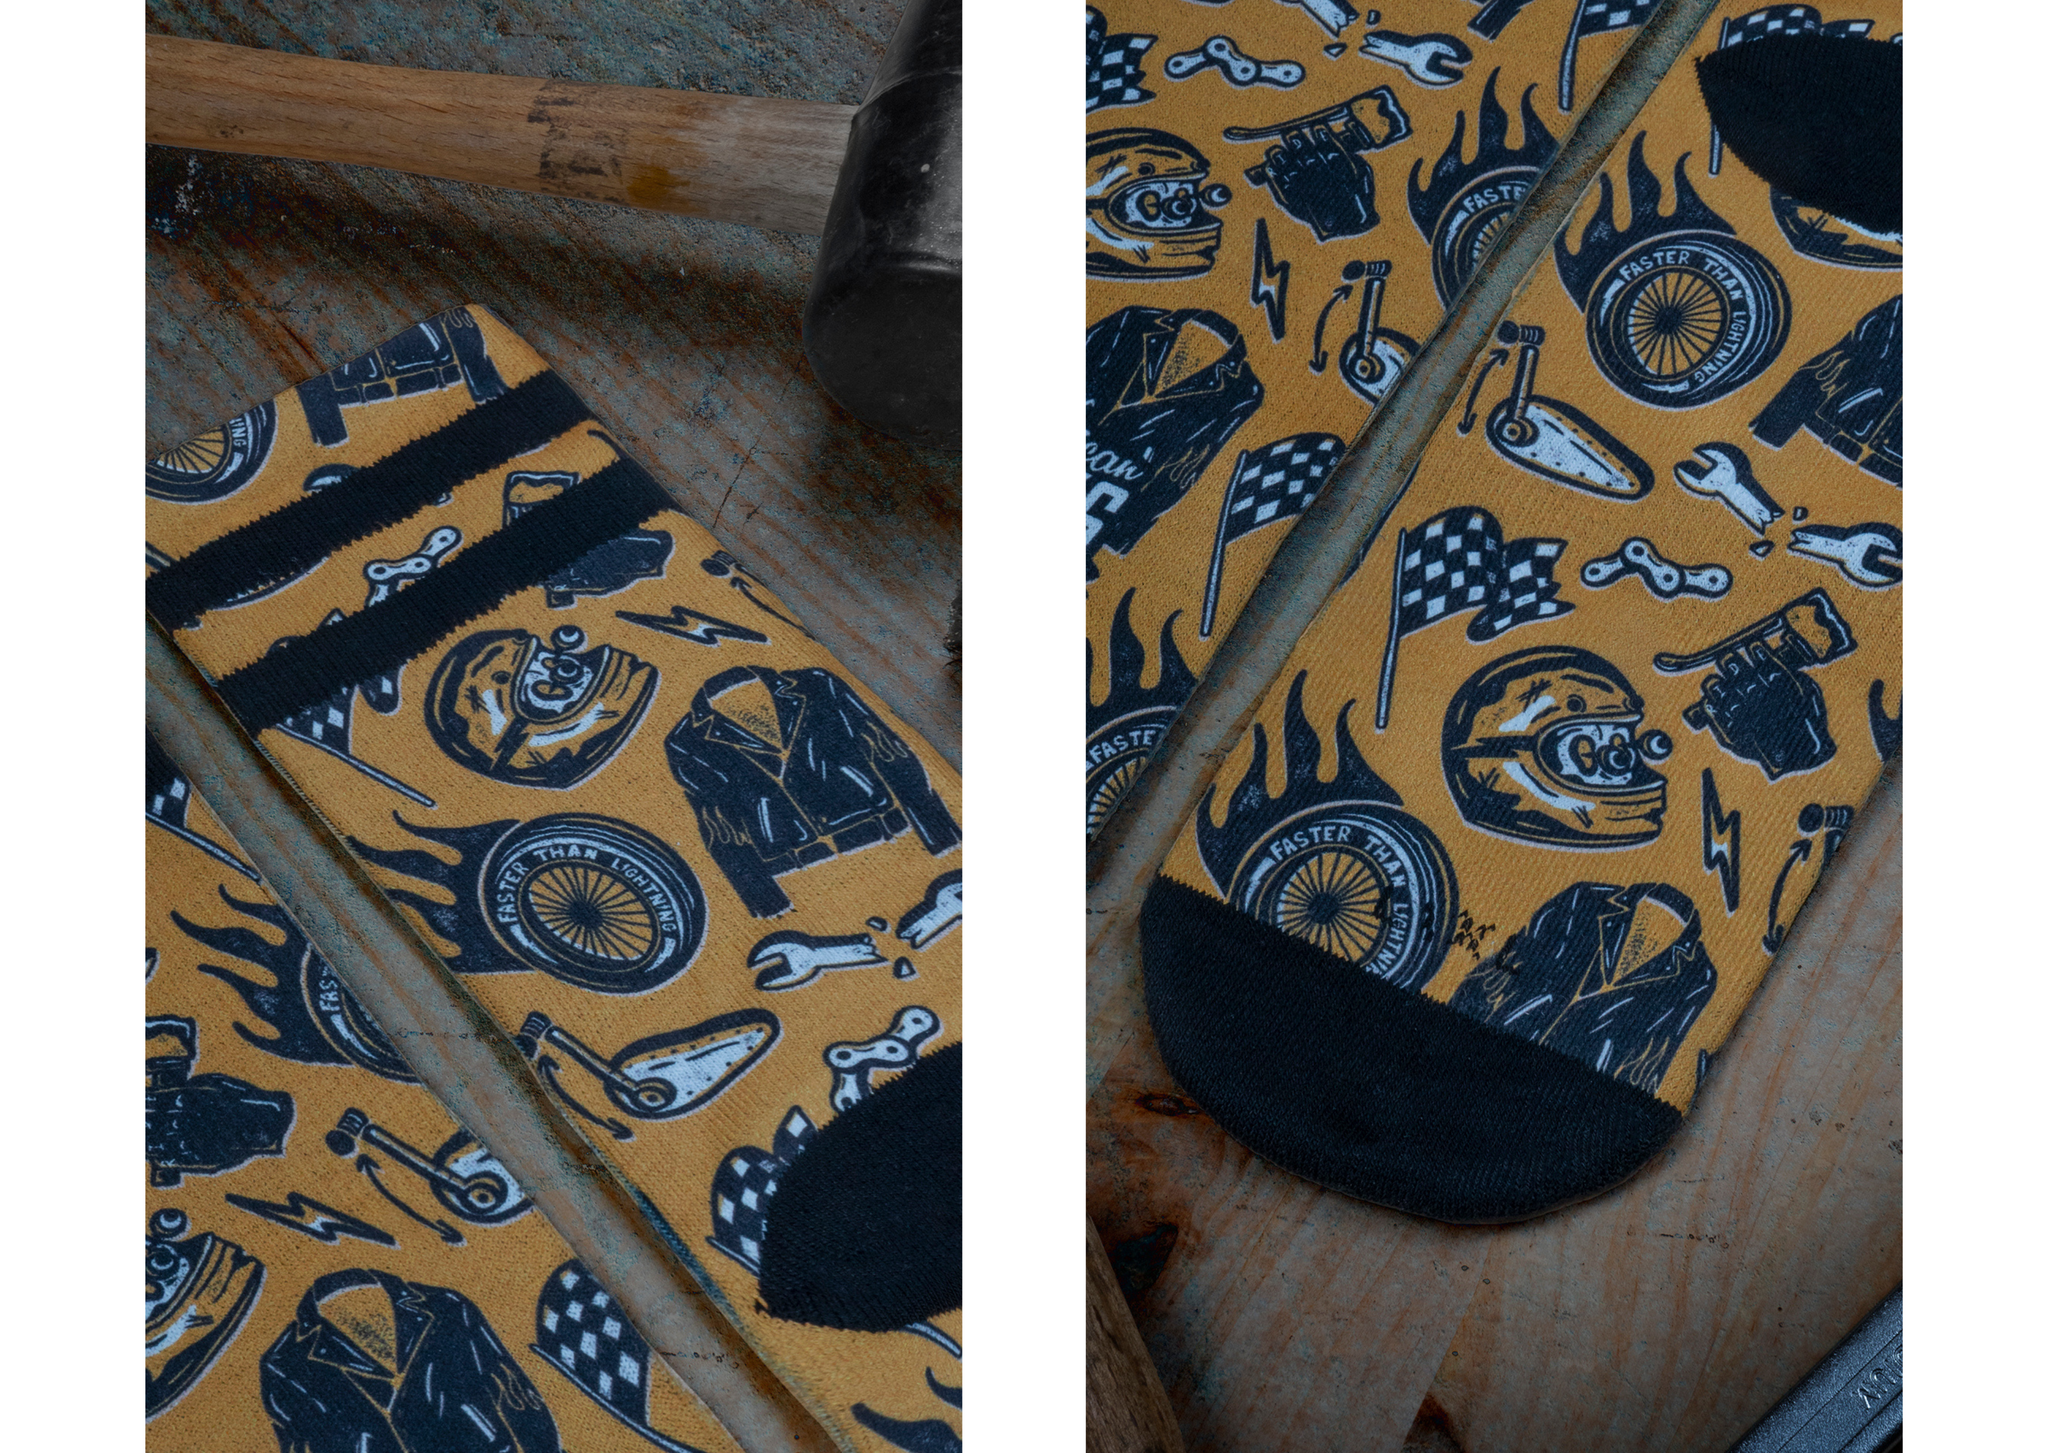 Cafe Racer, a new signature sock from American Socks